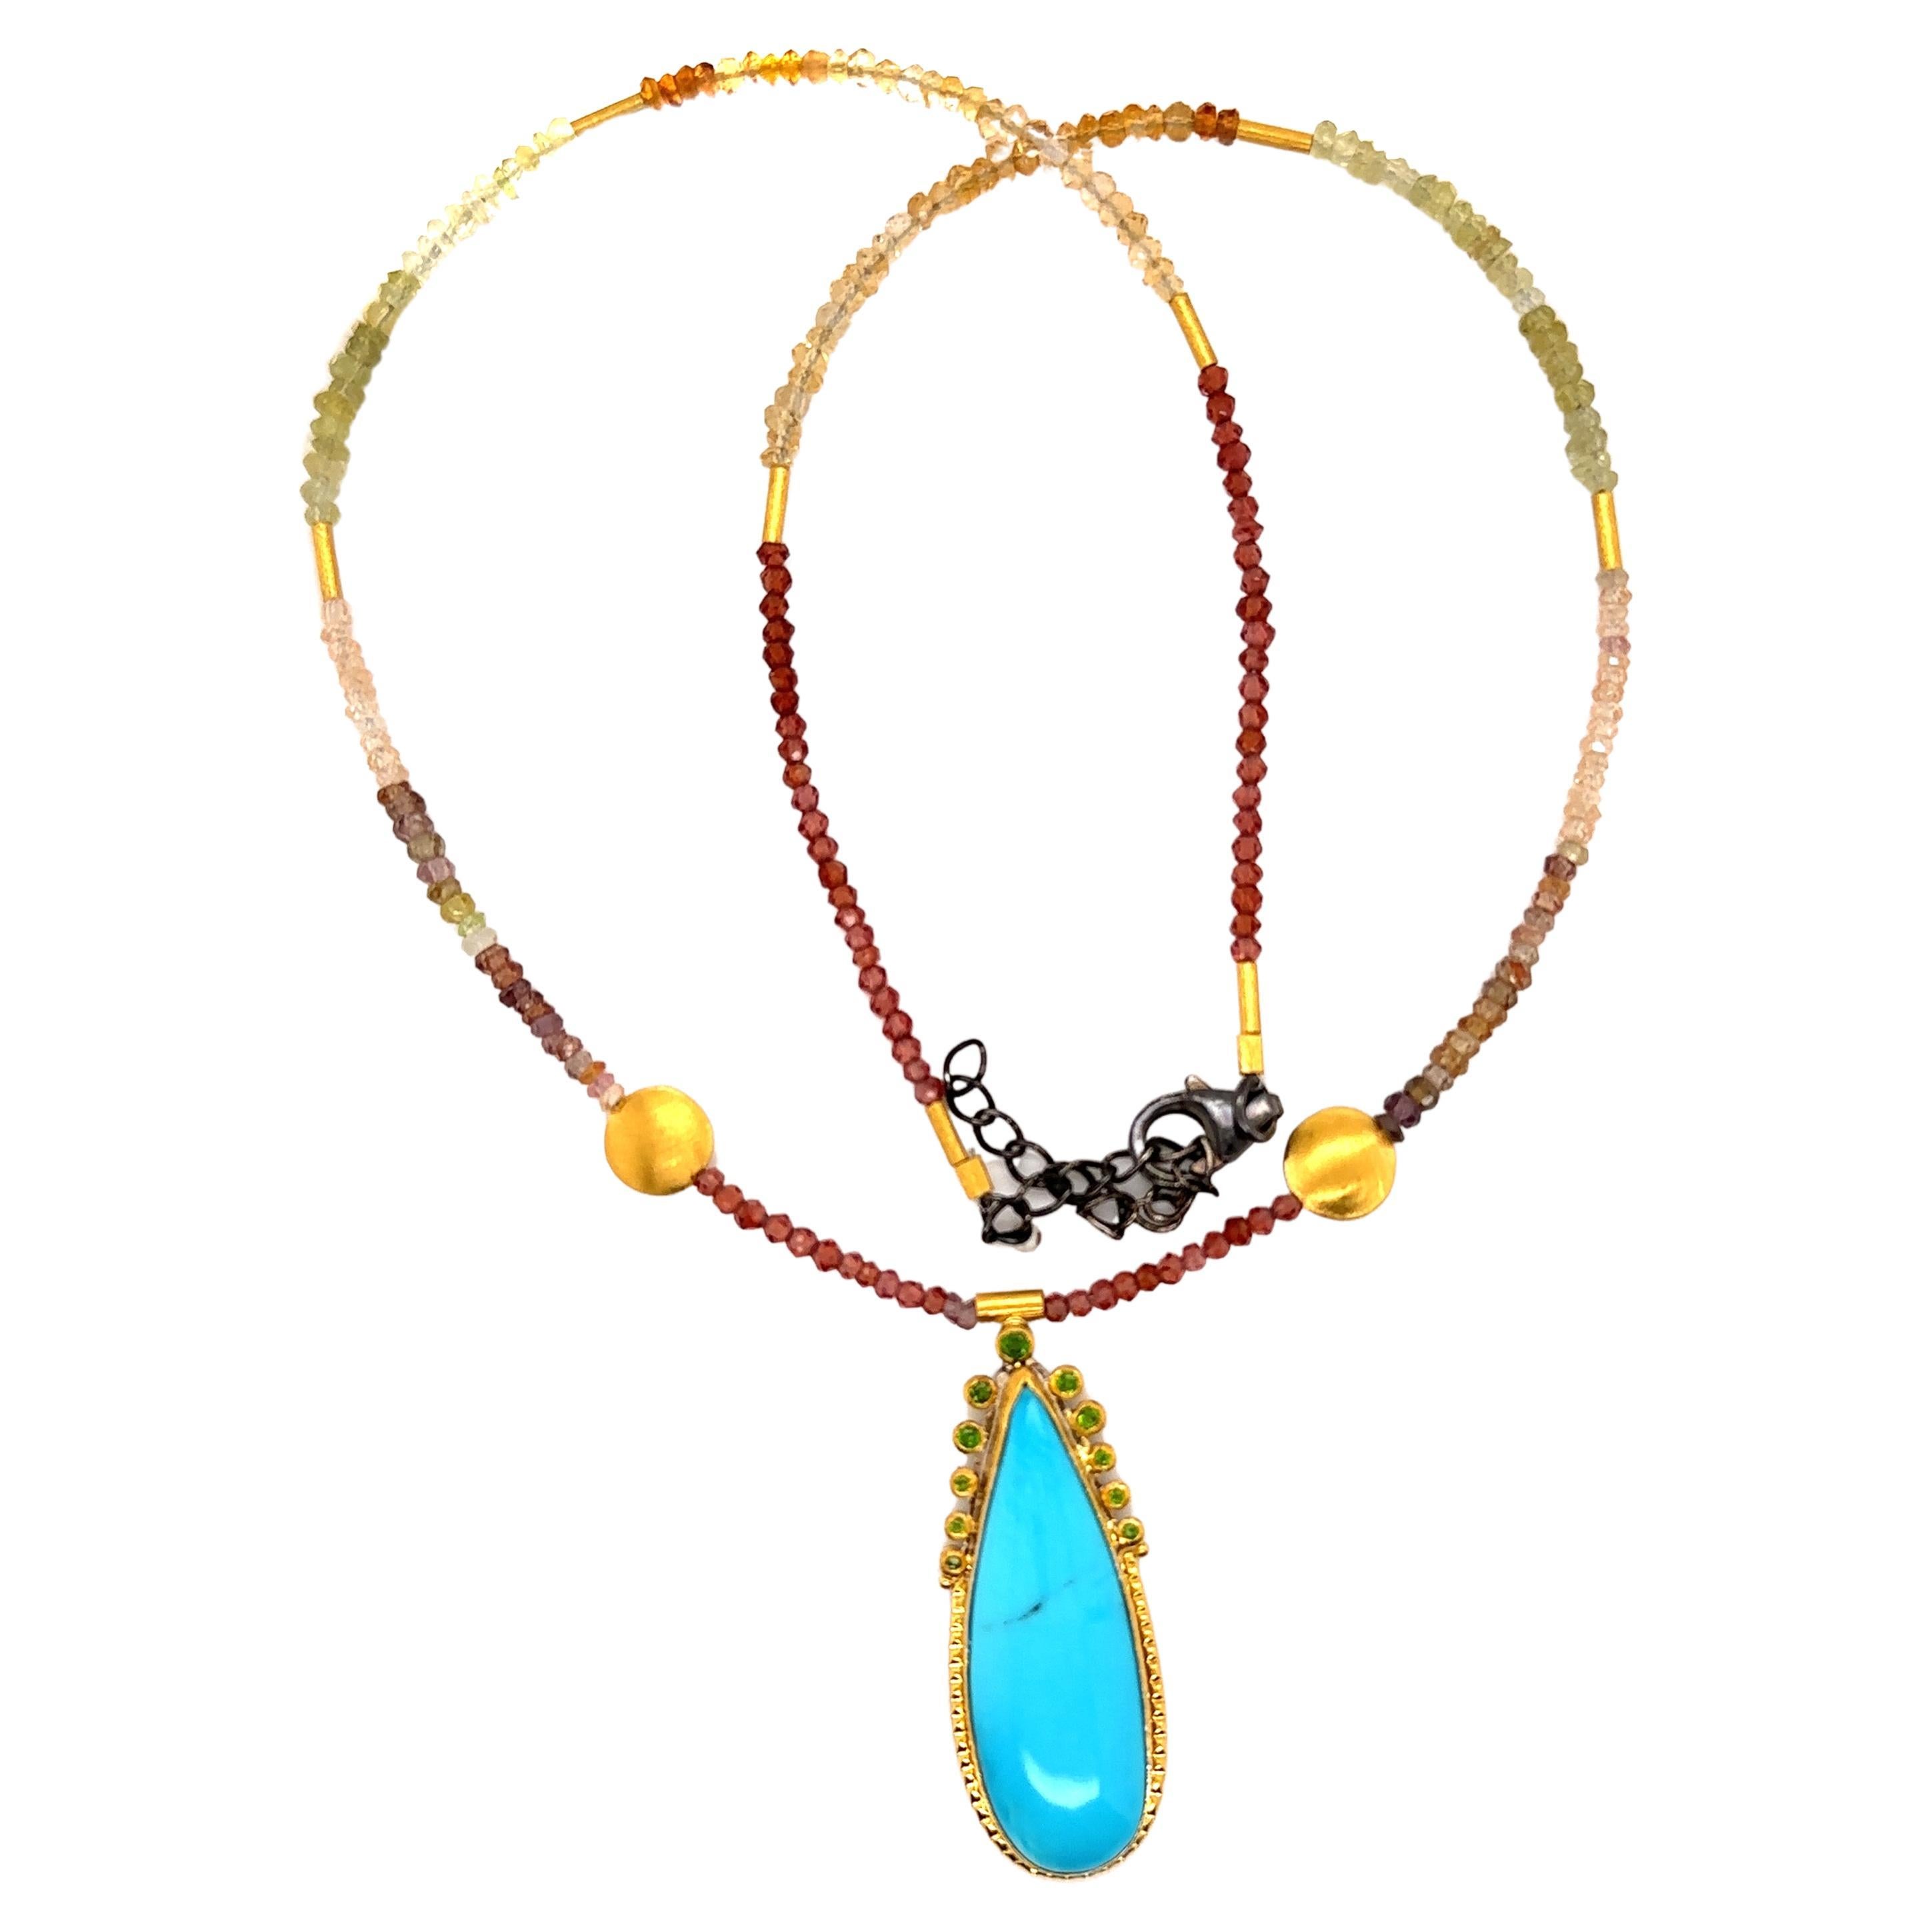 24K GOLD/STERLING SILVER with KINGMAN TURQUOISE, CHROME DIOPSIDES AND MULTI COLOR FACETED GARNET BEADS
Metal: 24K GOLD/SS
Stones Info: KINGMAN TURQUOISE 30X10MM
                    CHROME DIOPSIDES AND MULTI COLOR FACETED GARNET BEADS
Total Ct